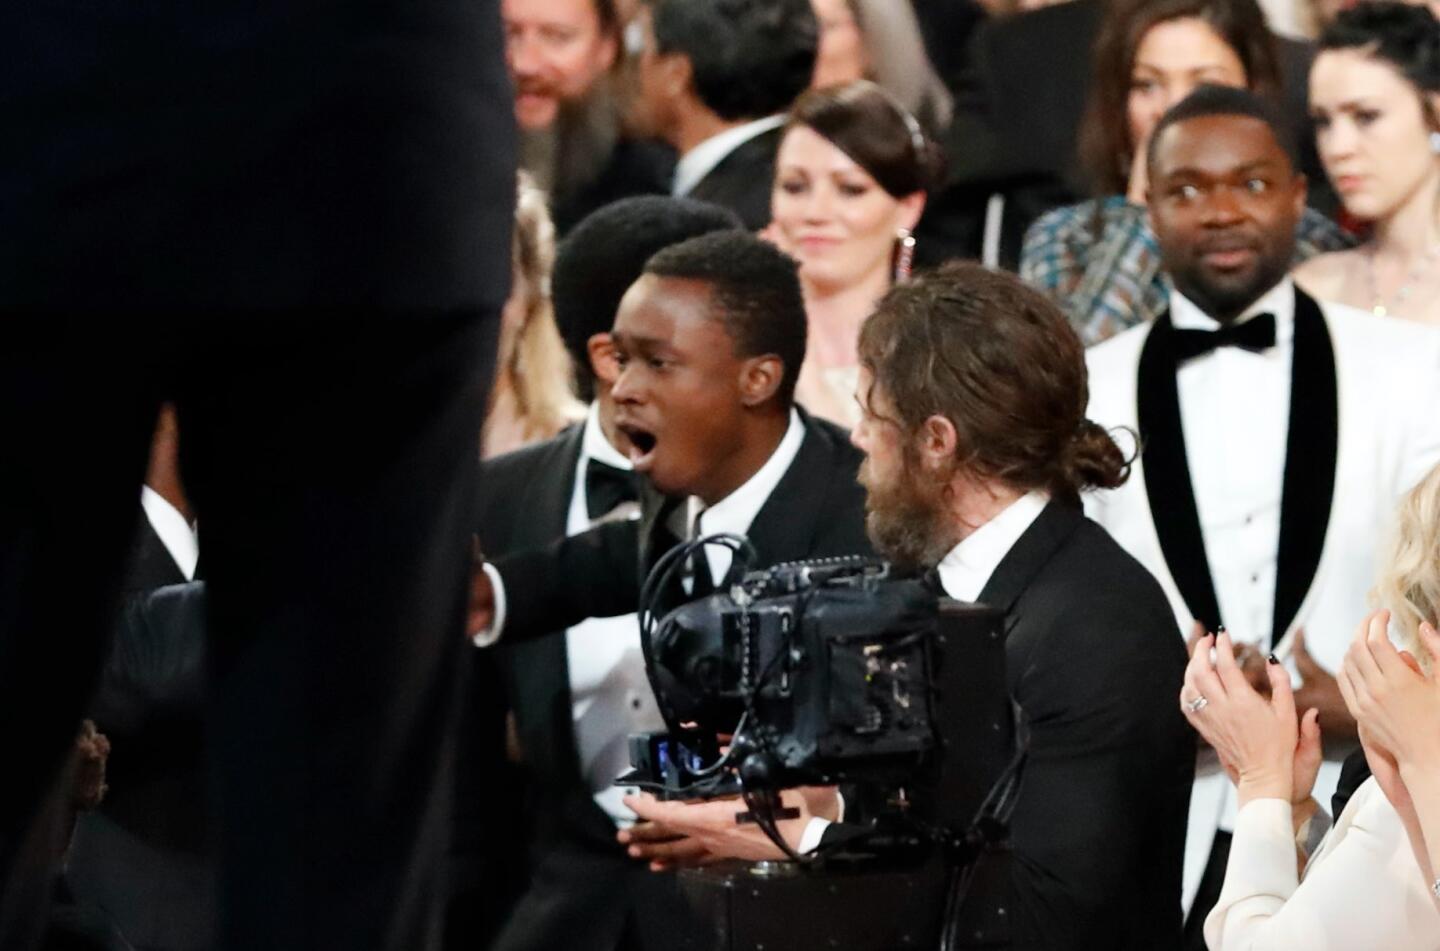 The audience reacts to 'Moonlight' best picture reveal